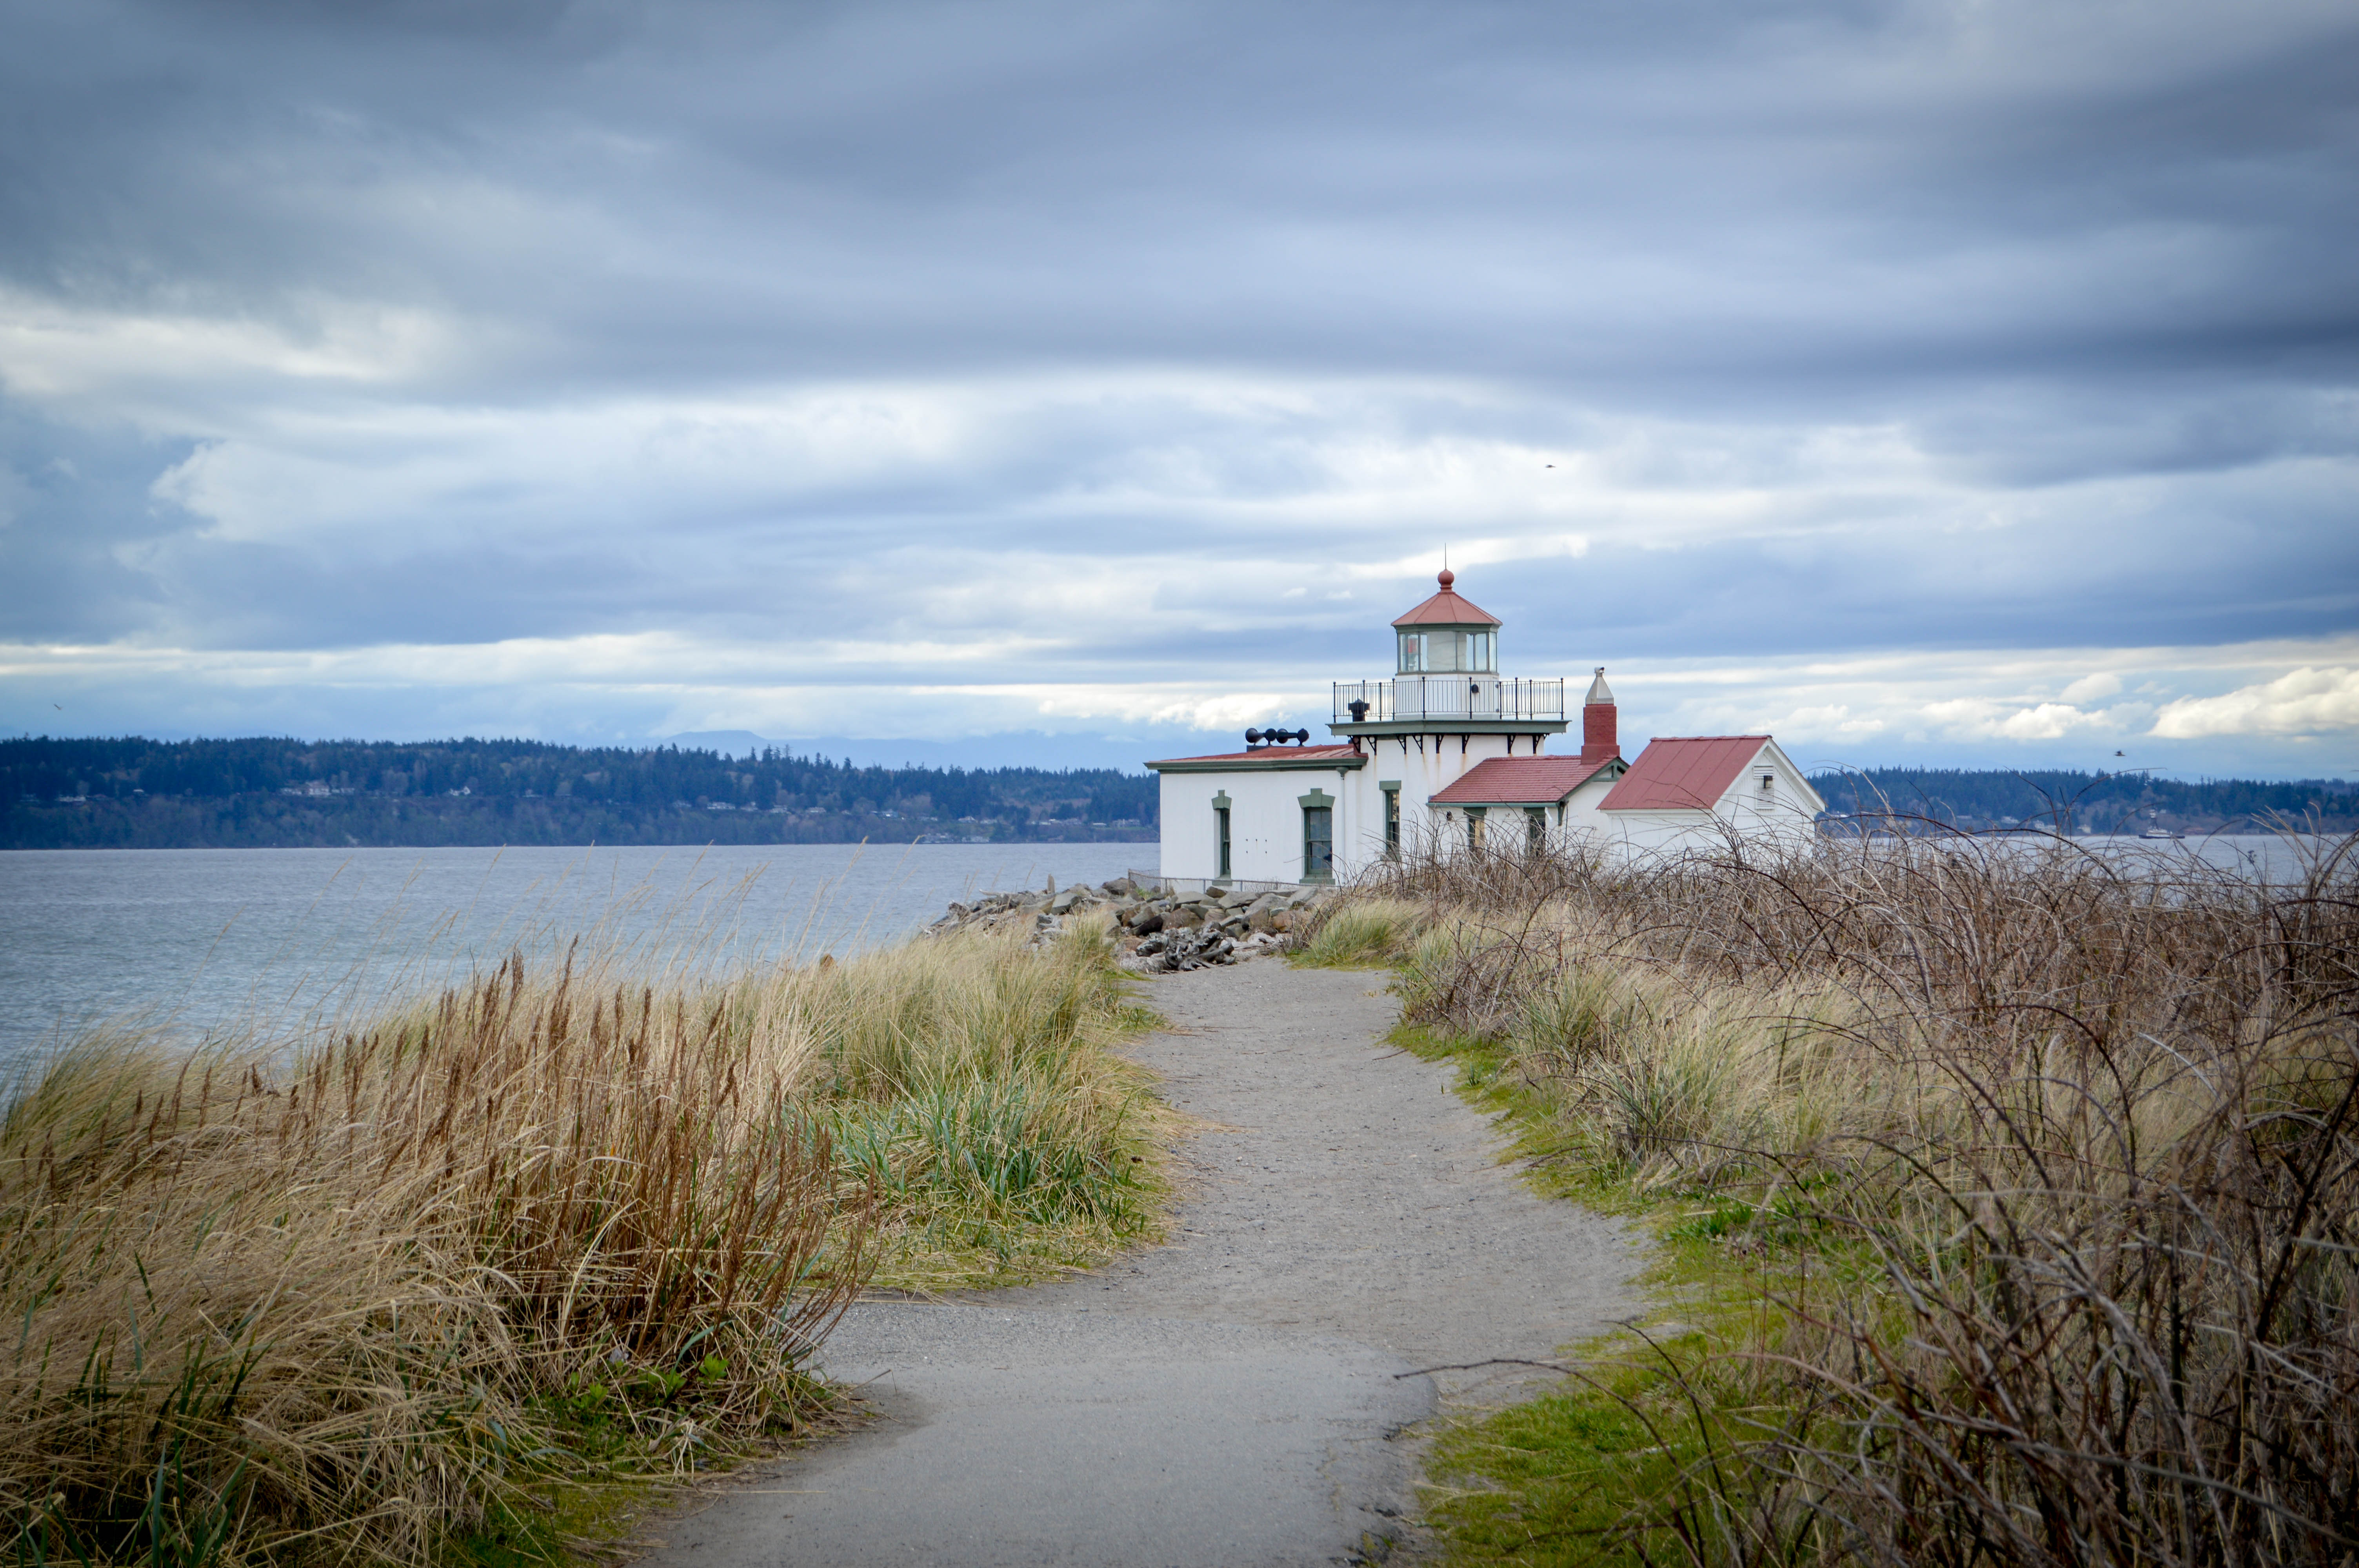 Discovery Park Adventure: The Driftwood Beach and Lighthouse